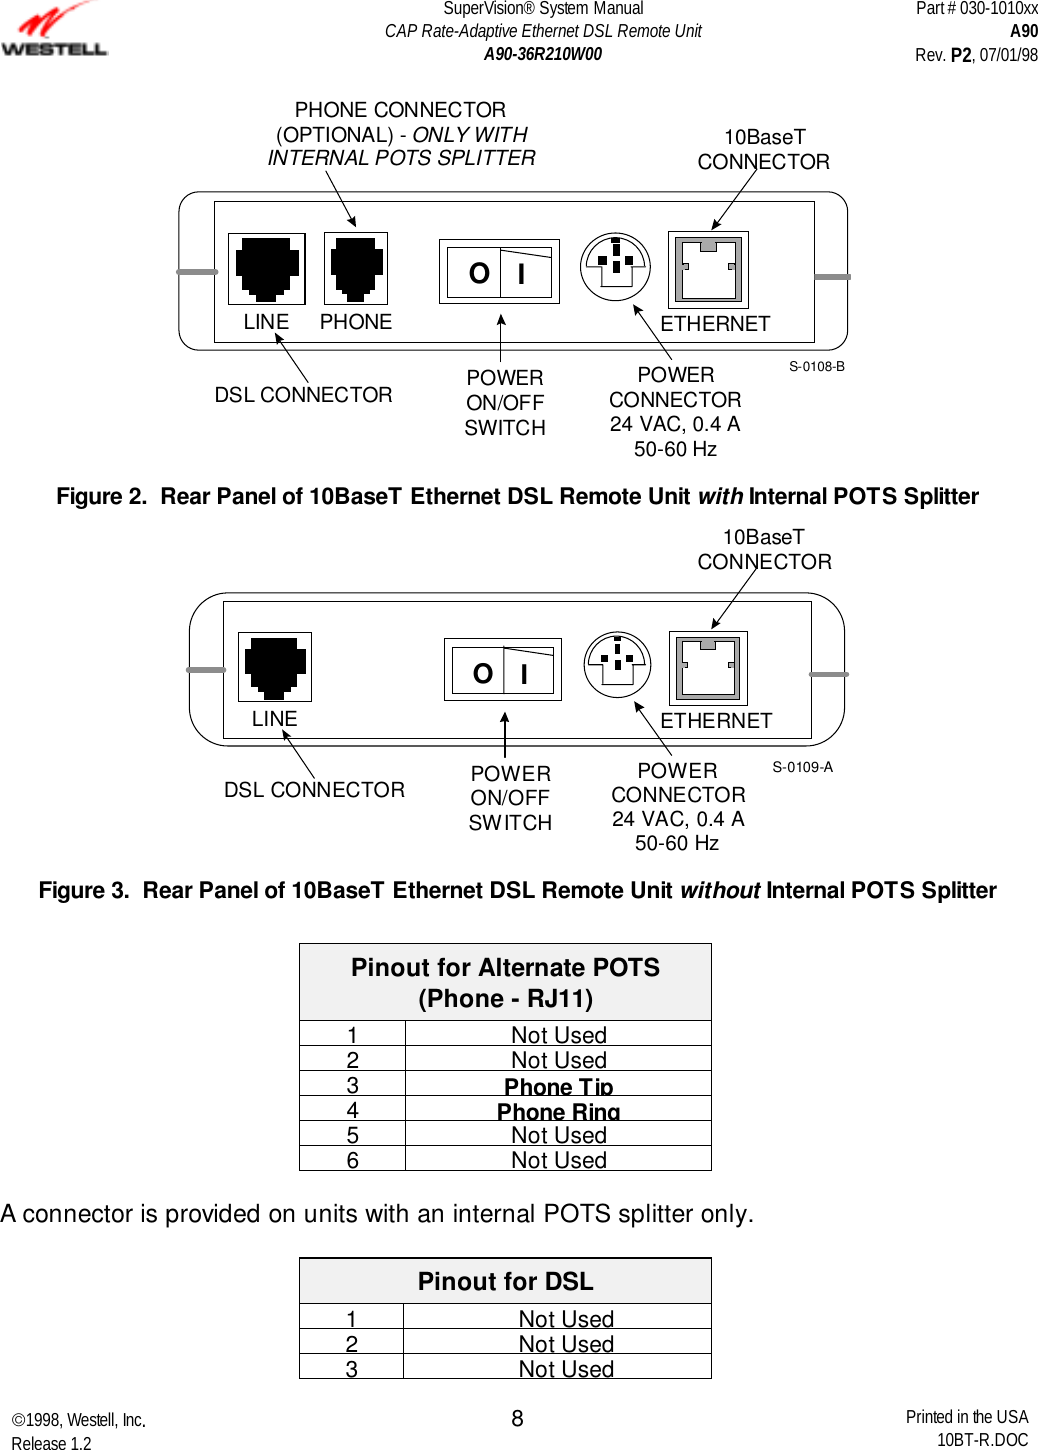 SuperVision® System ManualCAP Rate-Adaptive Ethernet DSL Remote UnitA90-36R210W00Part # 030-1010xxA90Rev. P2, 07/01/981998, Westell, Inc.Release 1.2 Printed in the USA10BT-R.DOC8IODSL CONNECTOR10BaseTCONNECTORPOWERCONNECTOR24 VAC, 0.4 A50-60 HzPOWERON/OFFSWITCHPHONE CONNECTOR(OPTIONAL) - ONLY WITHINTERNAL POTS SPLITTERLINE ETHERNETS-0108-BPHONEFigure 2.  Rear Panel of 10BaseT Ethernet DSL Remote Unit with Internal POTS SplitterPOWERCONNECTOR24 VAC, 0.4 A50-60 HzIODSL CONNECTOR10BaseTCONNECTORPOWERON/OFFSWITCHLINE ETHERNETS-0109-AFigure 3.  Rear Panel of 10BaseT Ethernet DSL Remote Unit without Internal POTS SplitterPinout for Alternate POTS(Phone - RJ11)1Not Used2Not Used3Phone Tip4Phone Ring5Not Used6Not UsedA connector is provided on units with an internal POTS splitter only.Pinout for DSL1Not Used2Not Used3Not Used